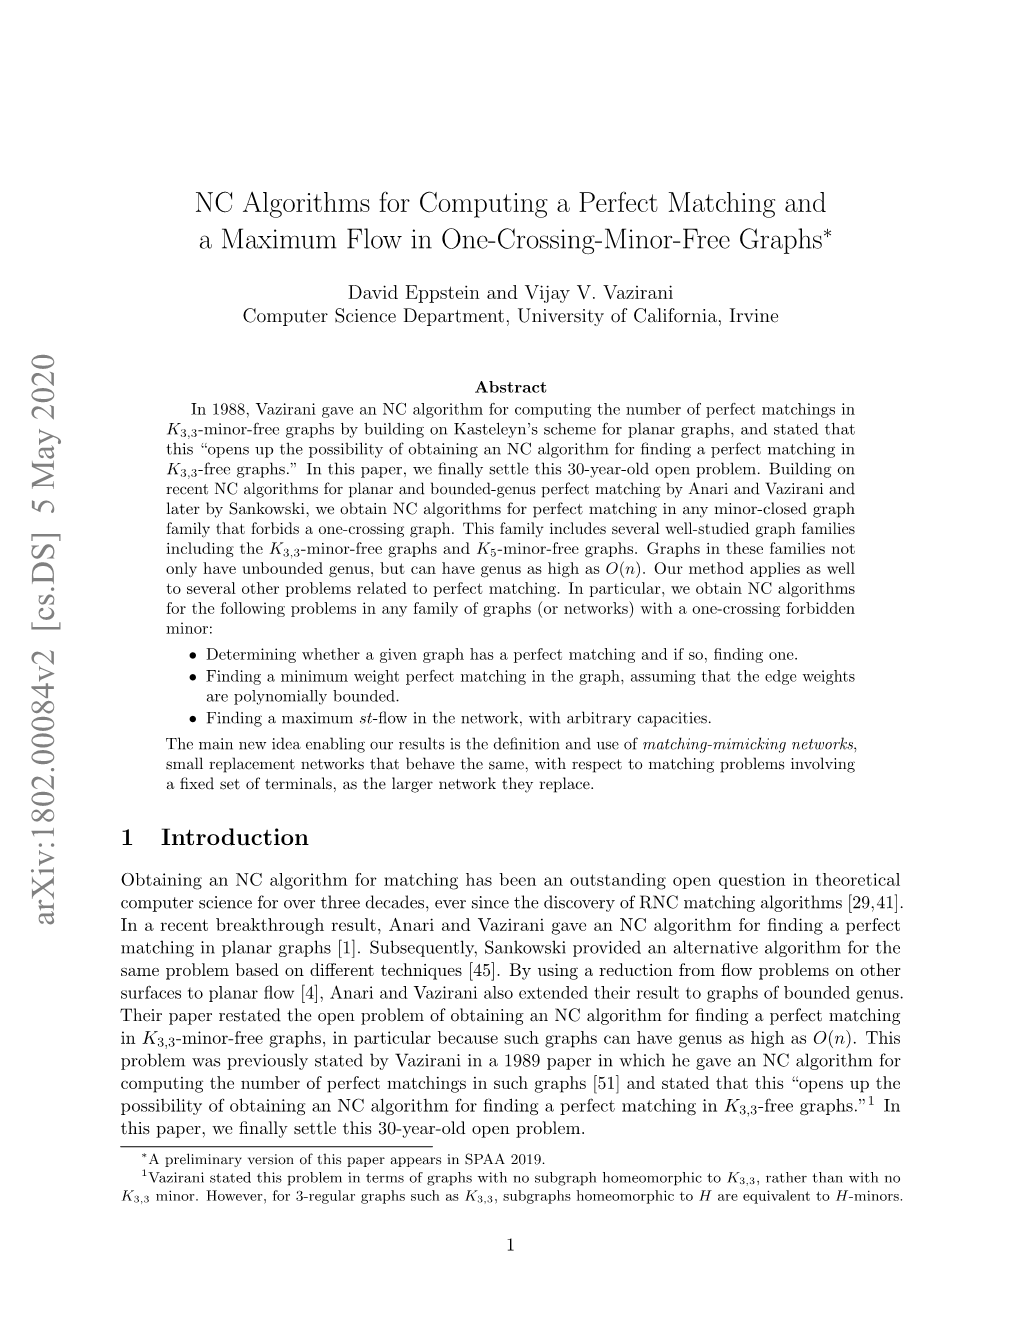 NC Algorithms for Computing a Perfect Matching and a Maximum Flow in One-Crossing-Minor-Free Graphs∗